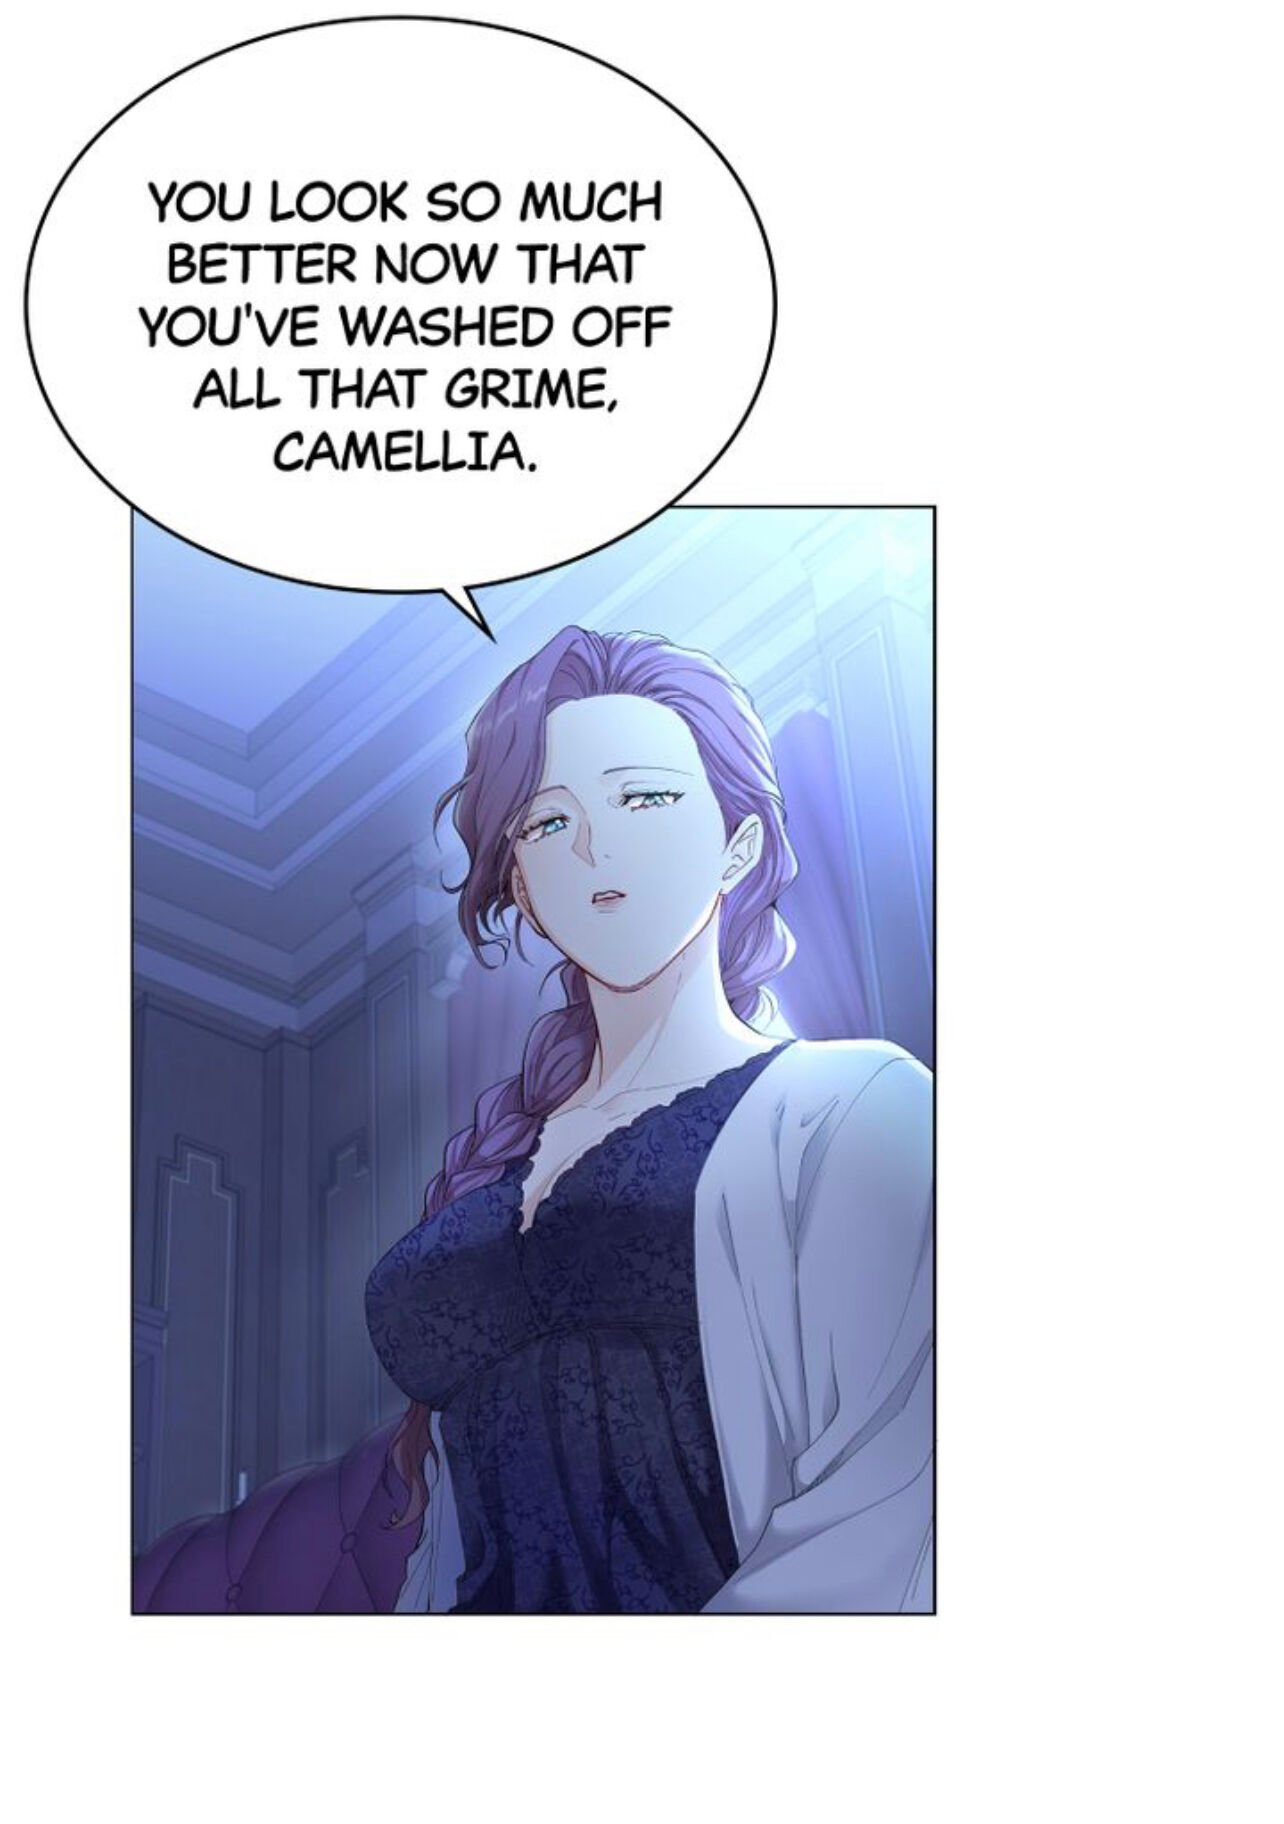 Finding Camellia chapter 3